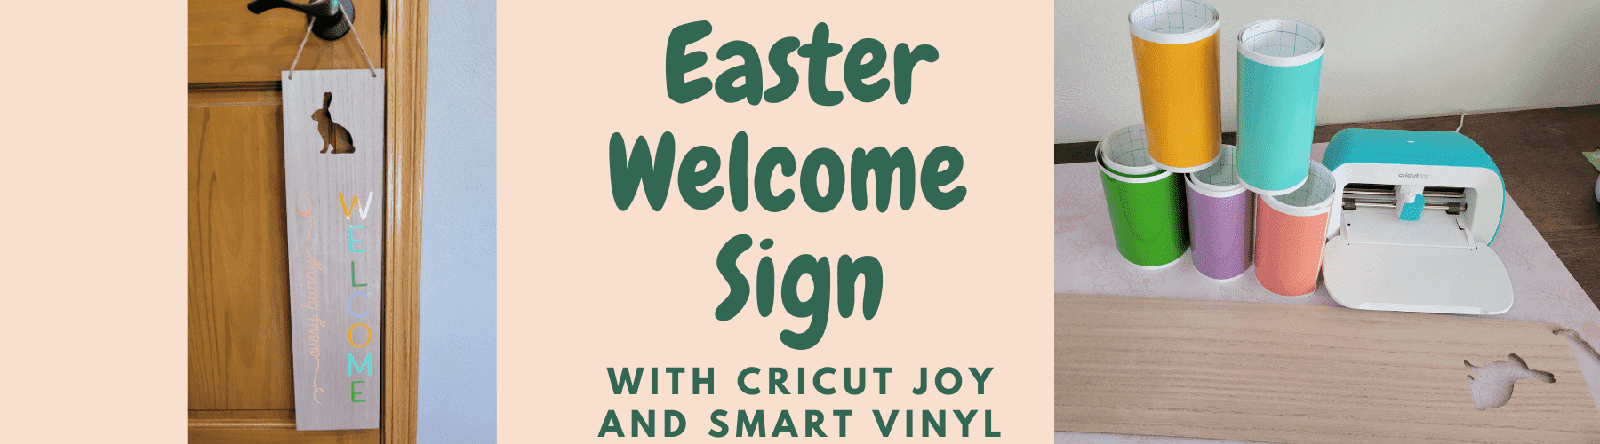 Easter Sign with the Cricut Joy and Smart Vinyl